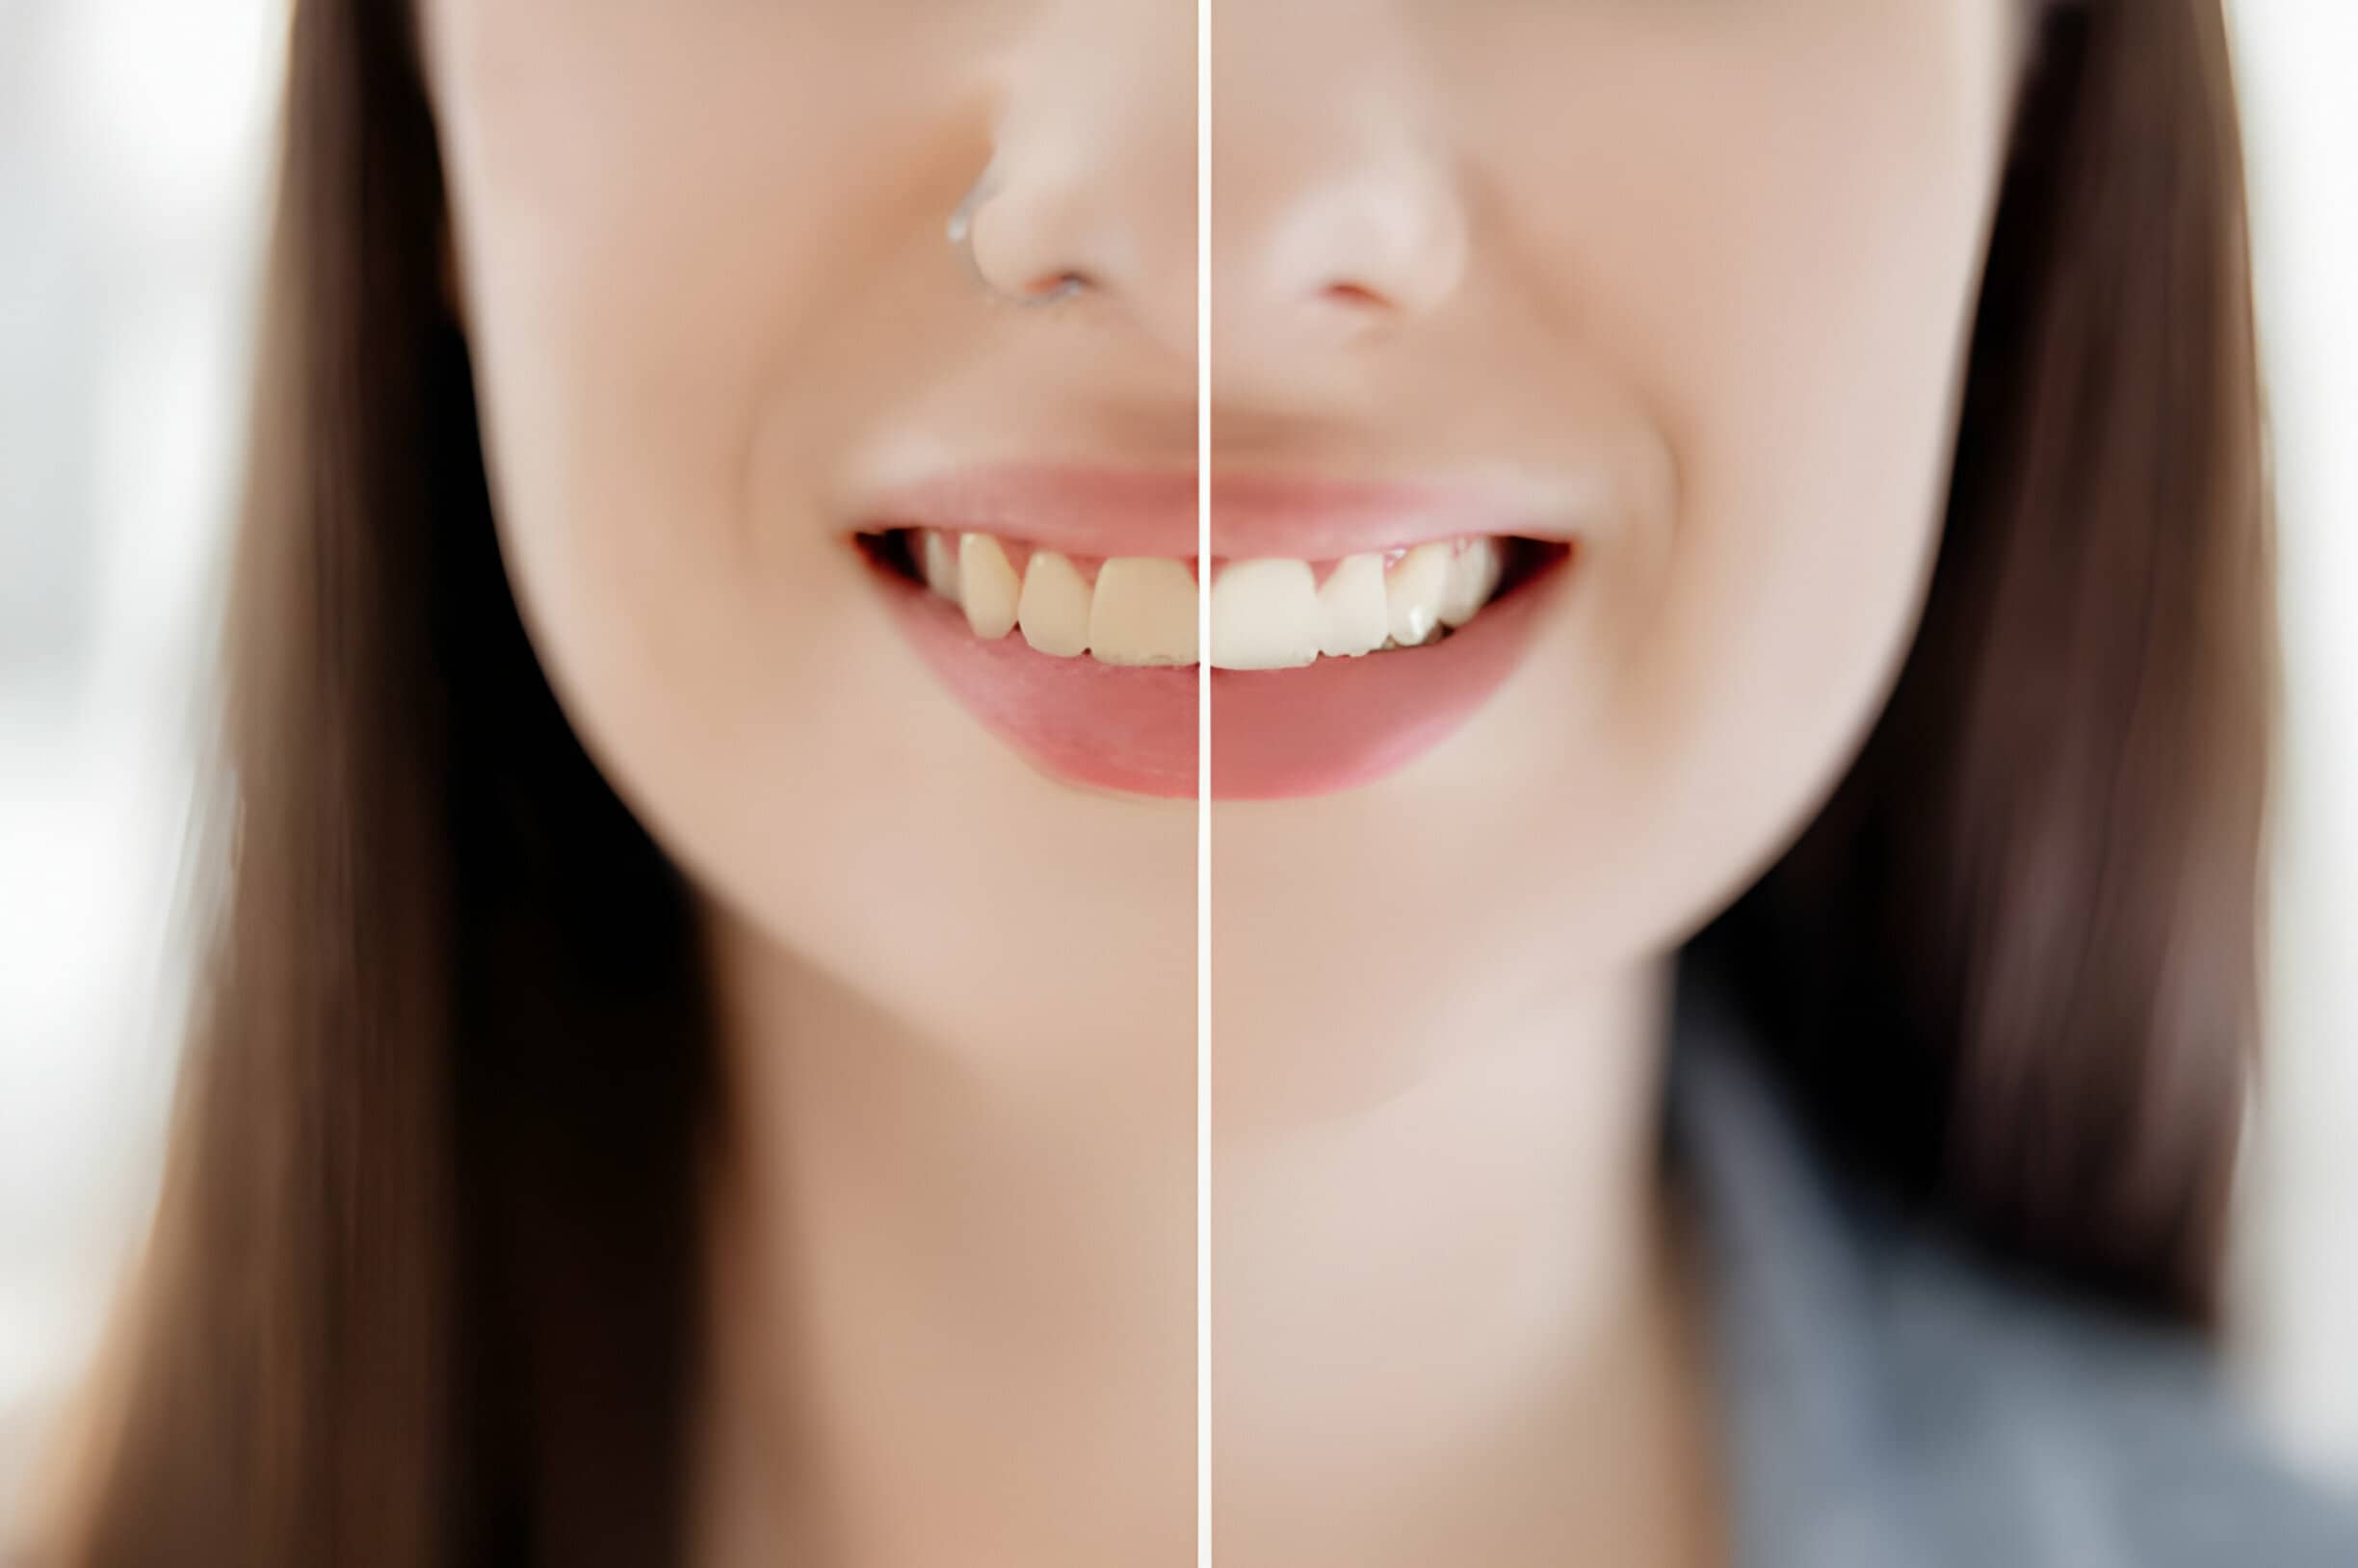 How Can I Permanently Whiten My Teeth?